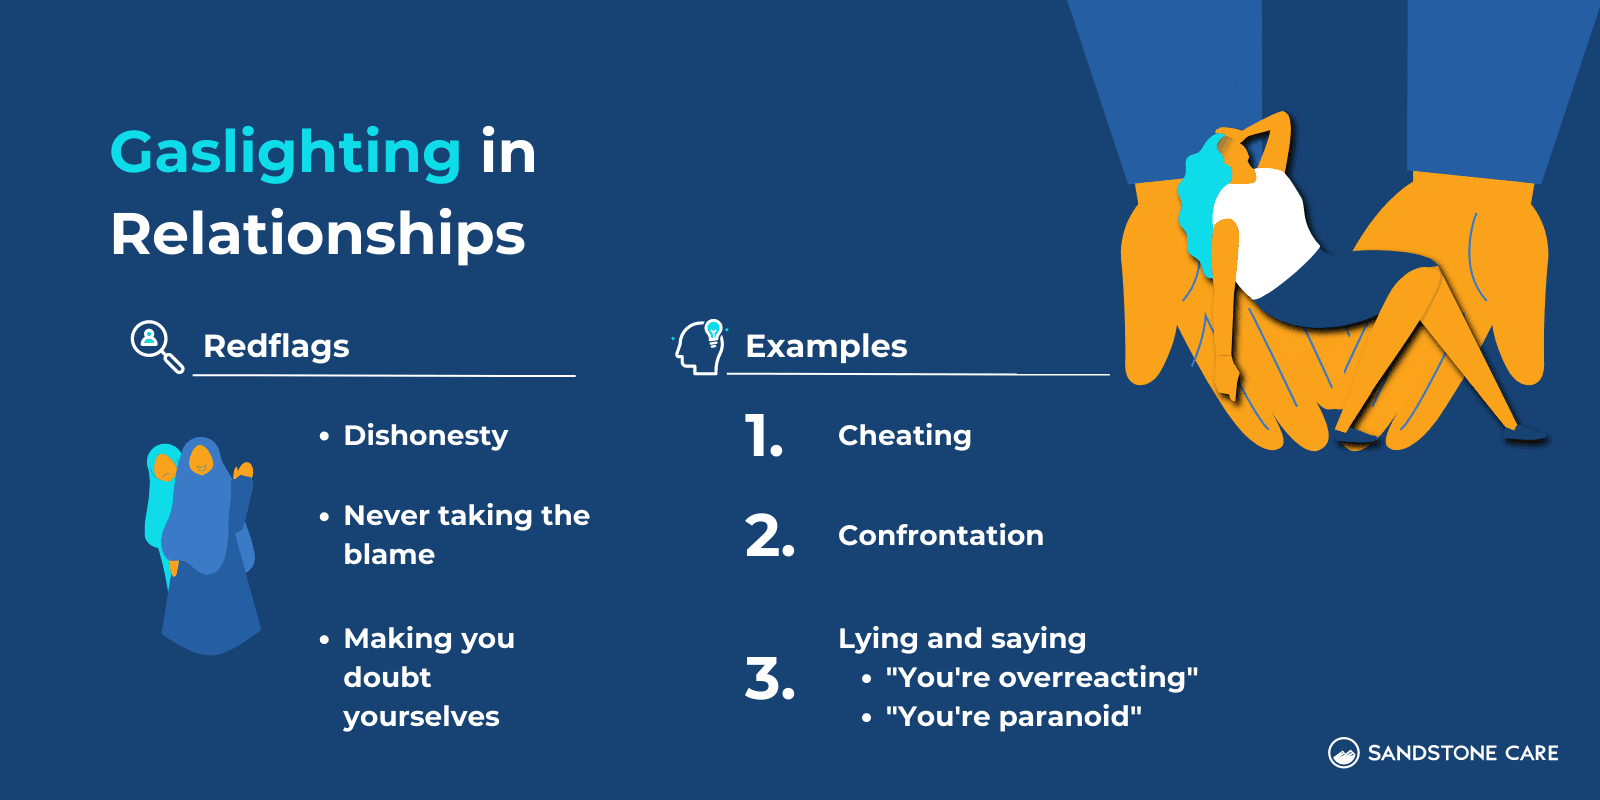 "Signals of Gaslighting in Relationship" written above 2 columns of text for "Signals to look out for" and "Examples"